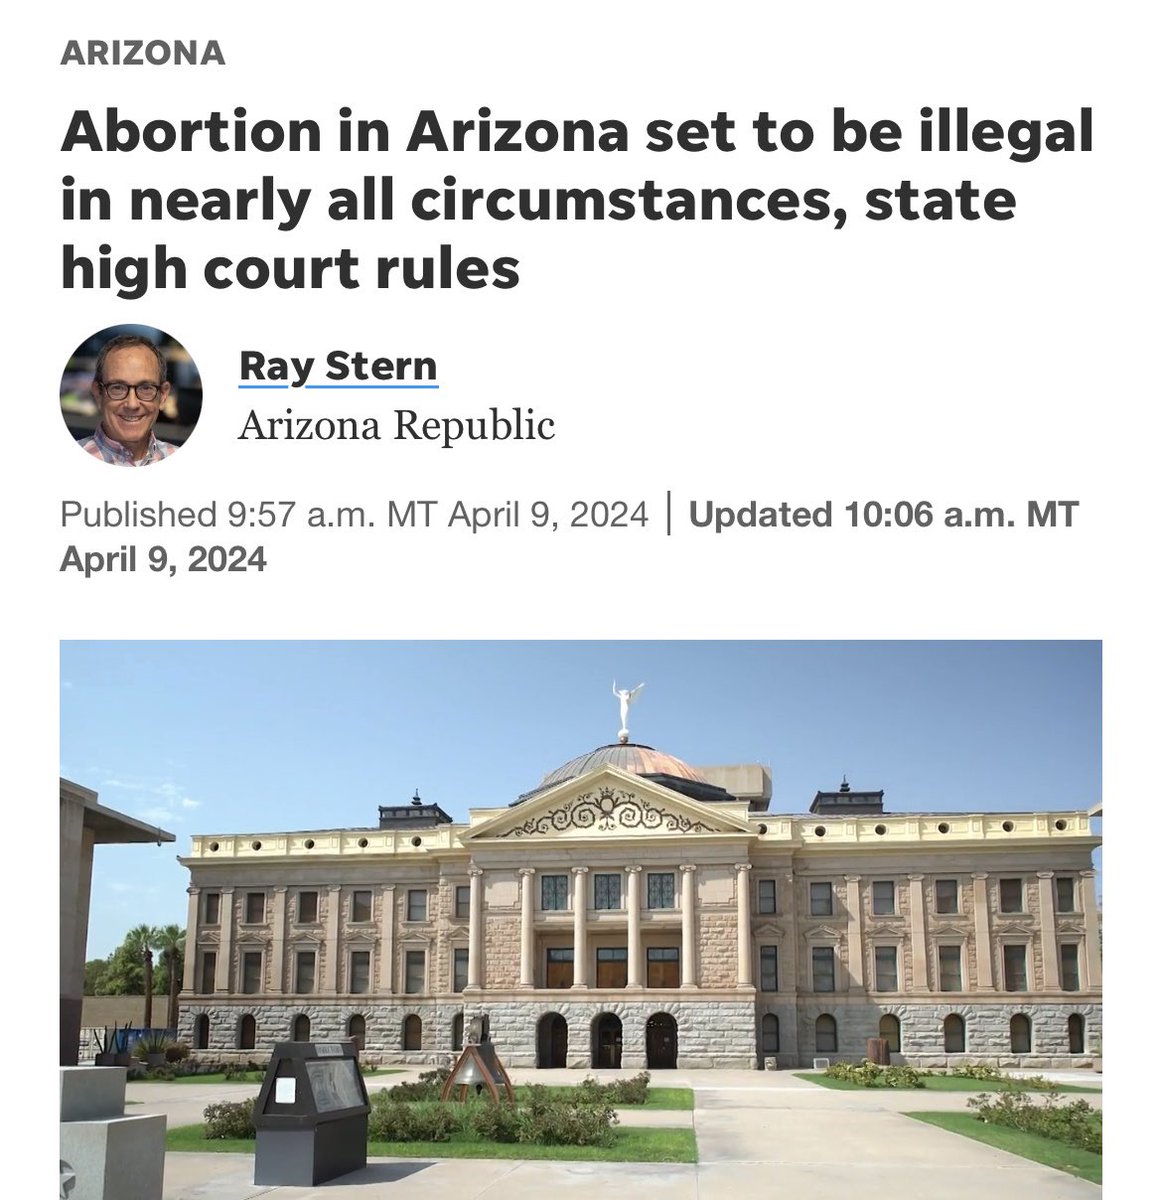 The Arizona State Supreme Court just issued a horrific ruling reinstating an abortion ban from 1864 (before Arizona became a state). The law imposes criminal penalties like up to five years in prison on anyone who provides or aids in providing an abortion.